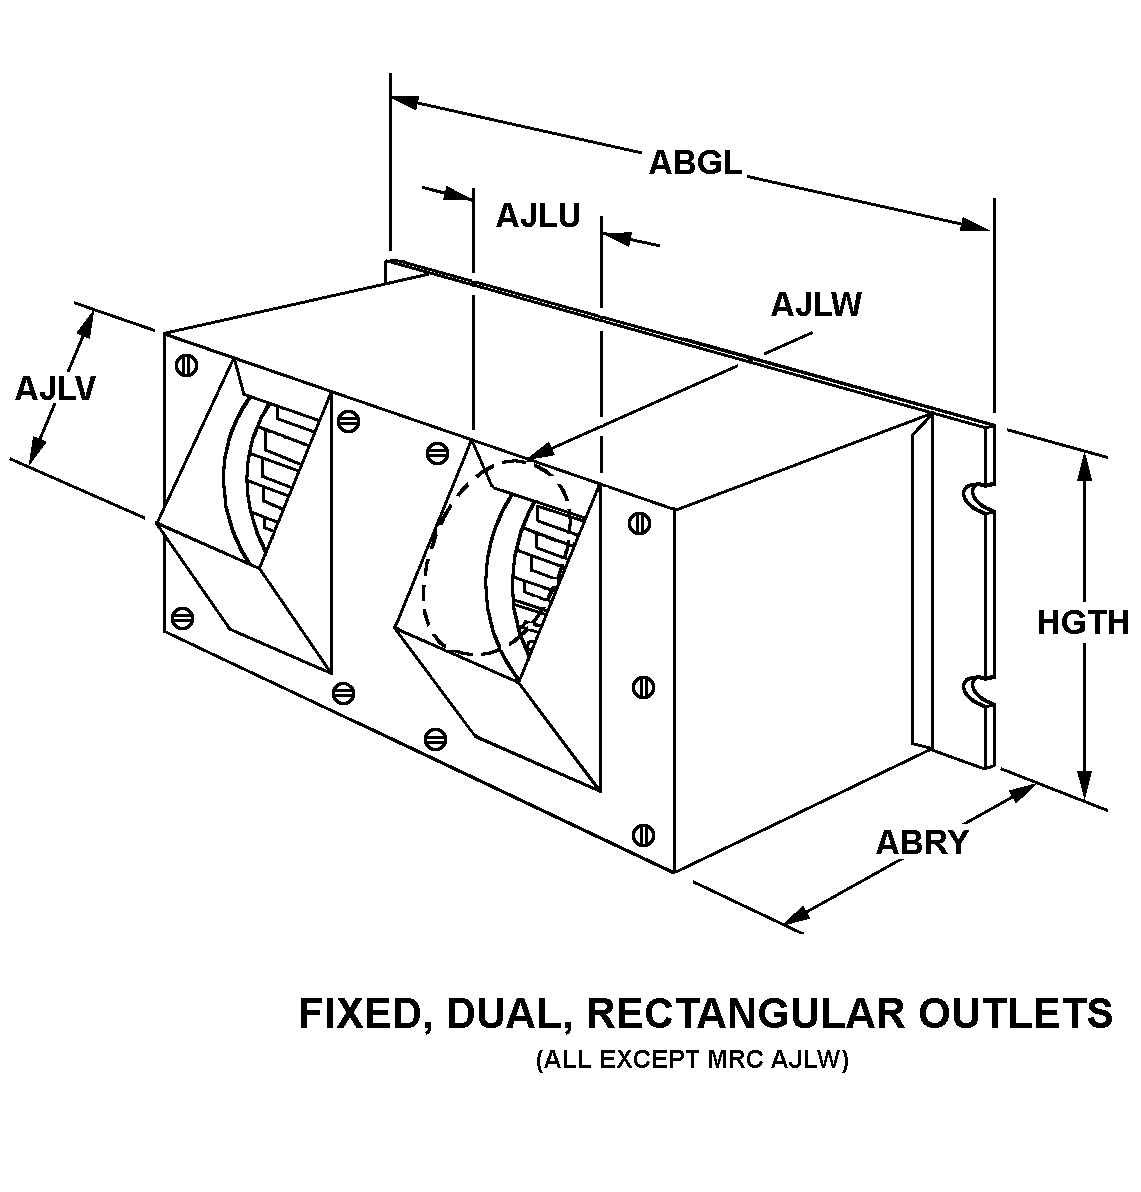 FIXED, DUAL, RECTANGULAR OUTLETS style nsn 4140-01-062-9822